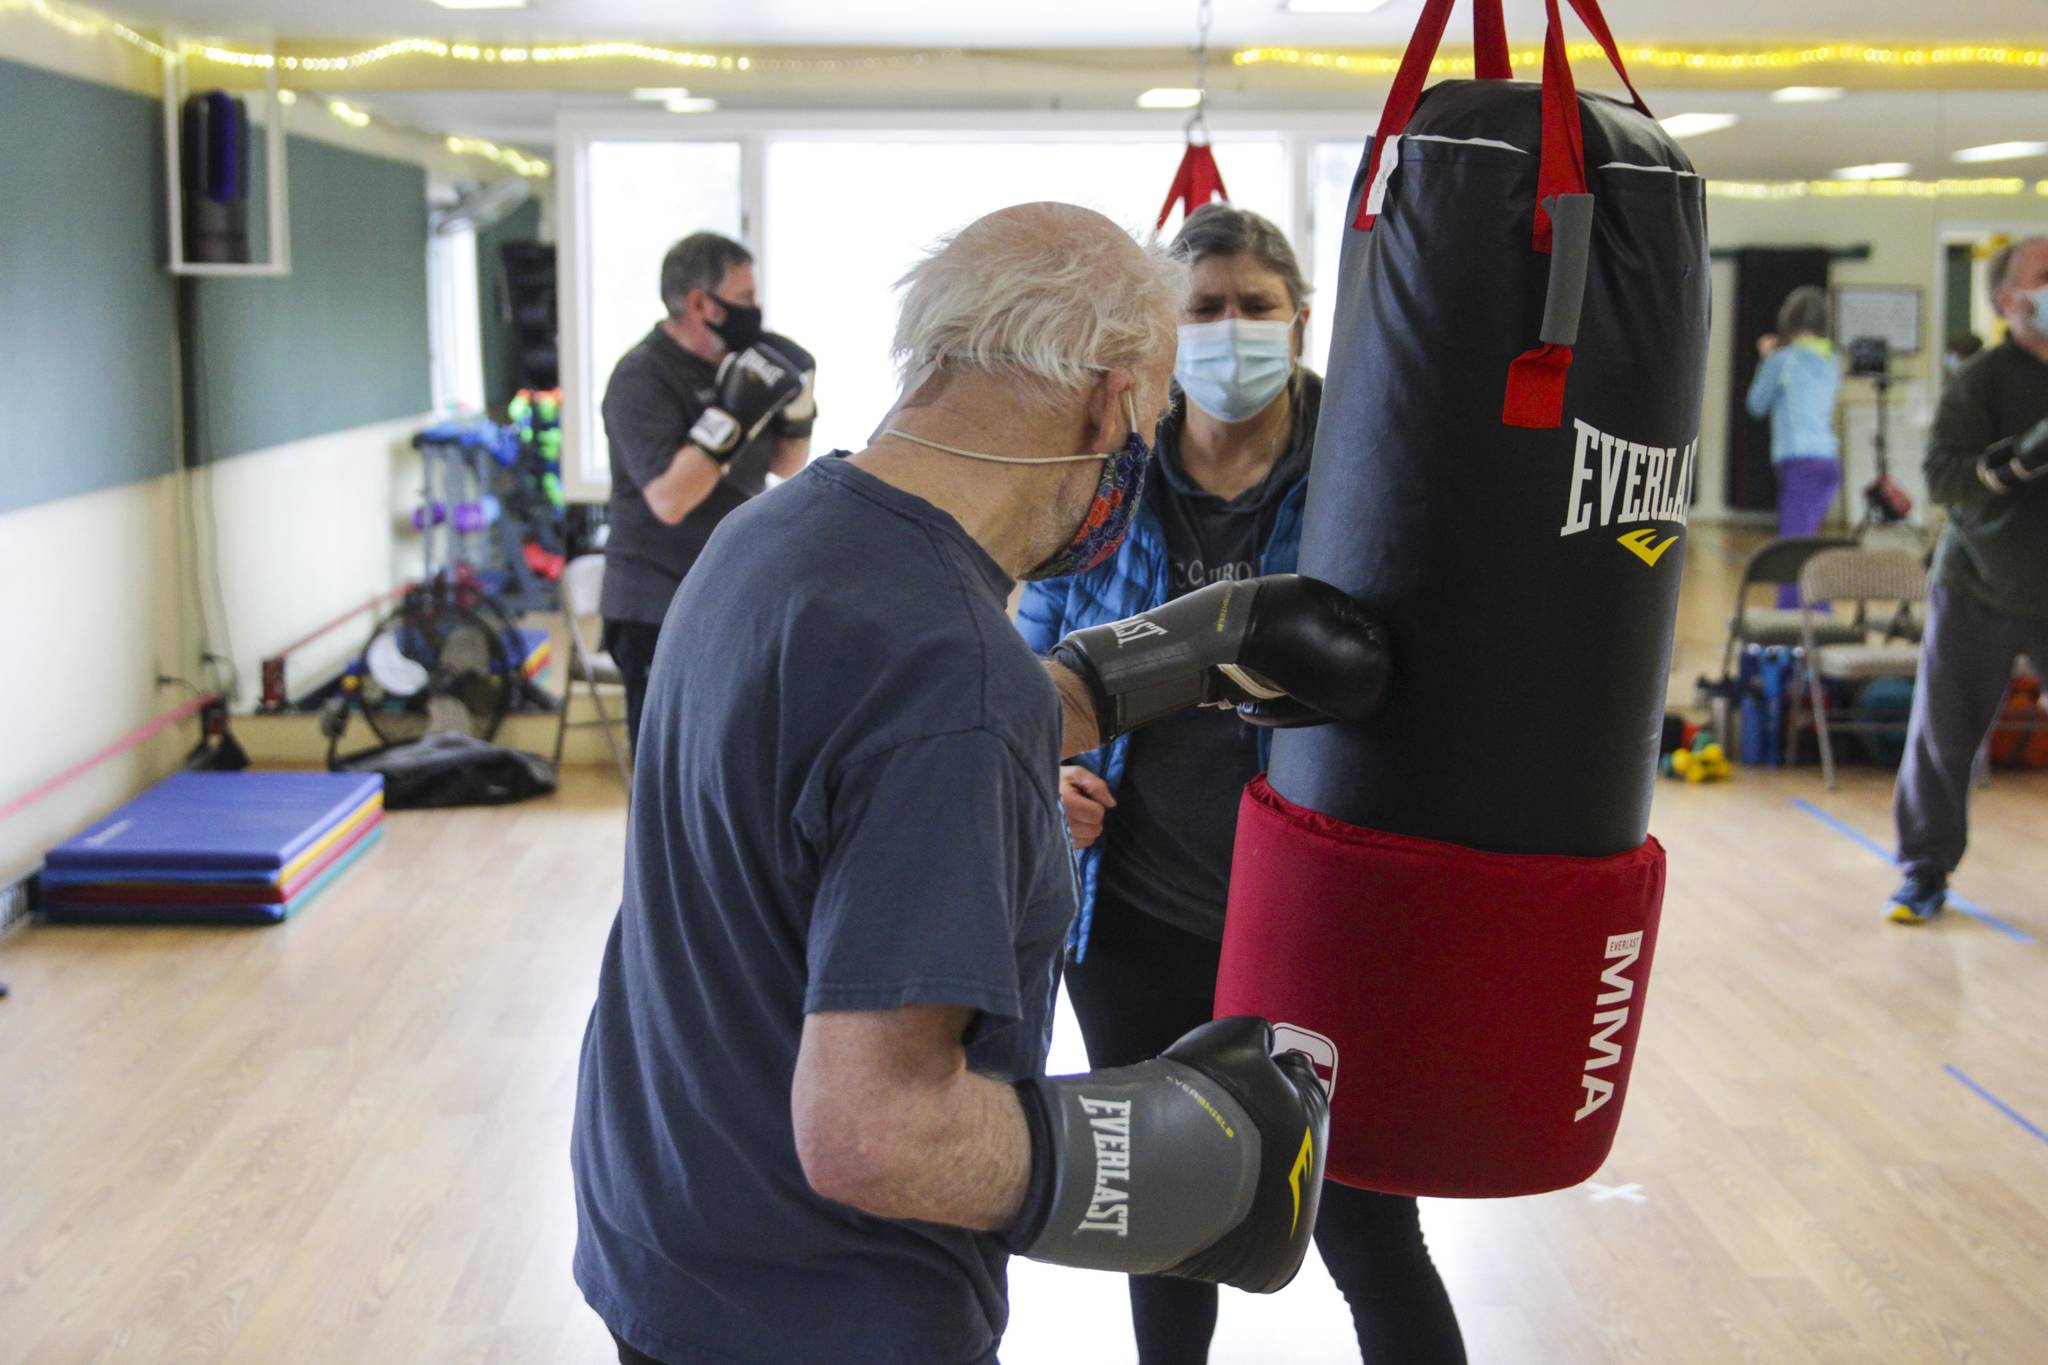 Steve Wolf strikes a punching bag as his wife Bev Ingram holds it during a boxing class designed to help fight back against the symptoms Parkinson’s disease through a specific regimen at Pavitt Health and Fitness on March. 2, 2021. (Michael S. Lockett / Juneau Empire)